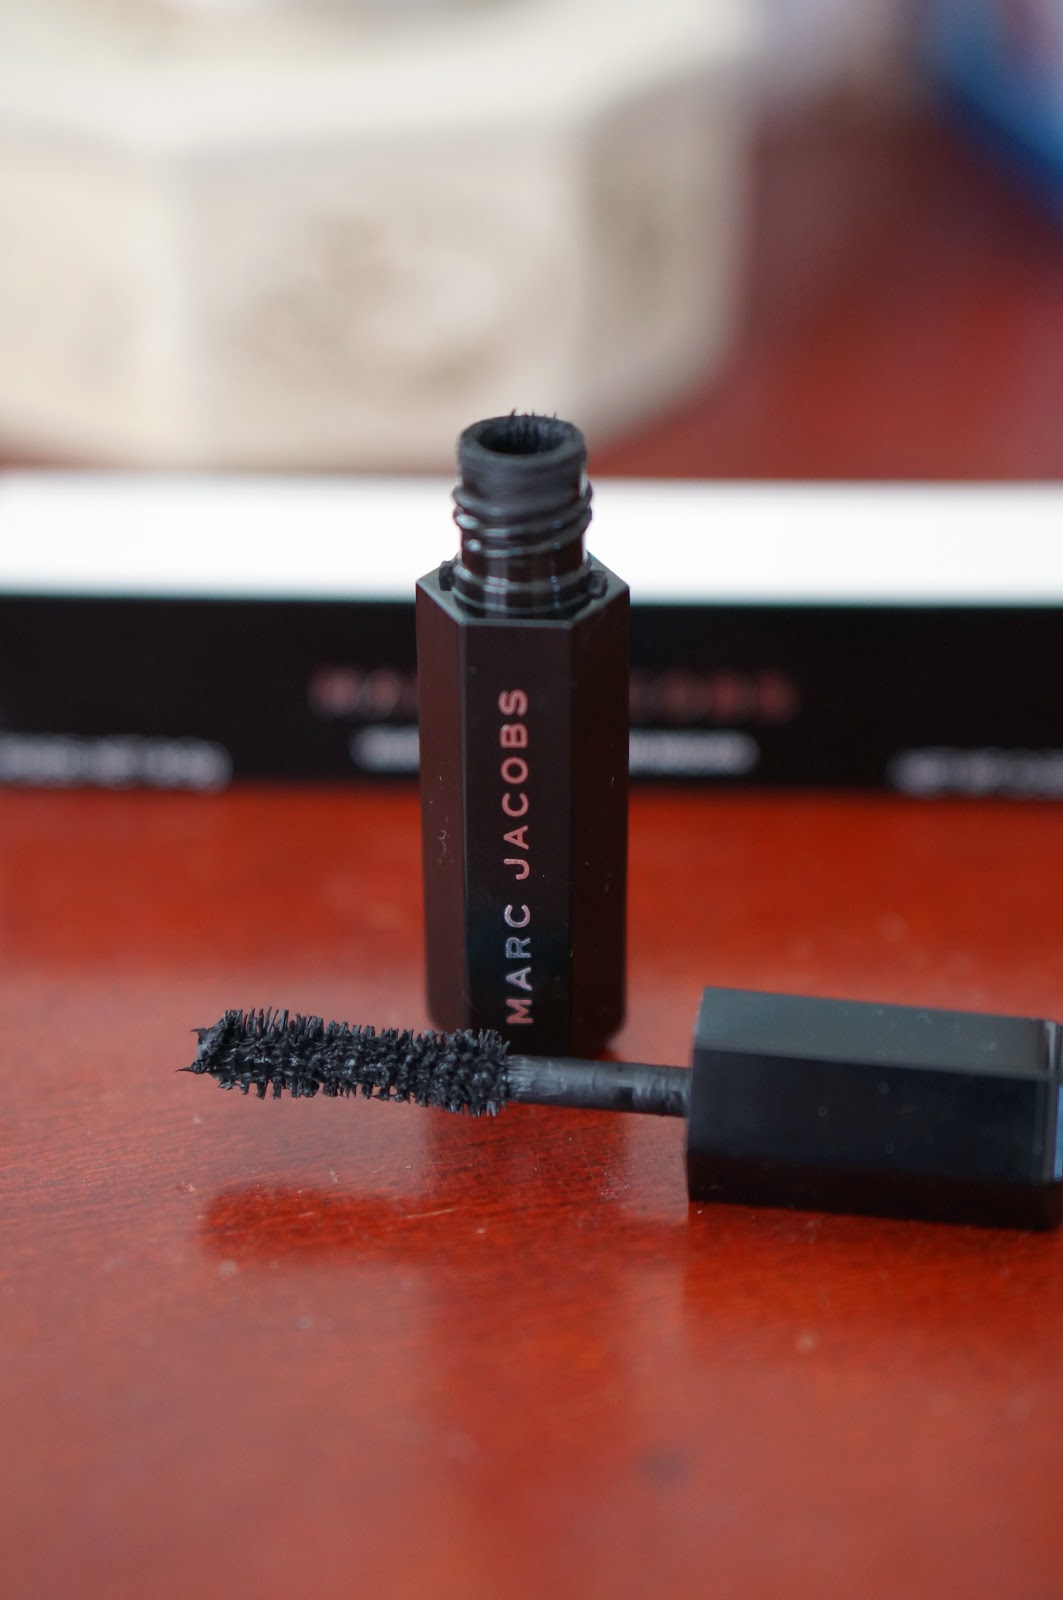 CRUELTY FREE BEAUTY | MARC JACOBS MASCARA REVIEW by North Carolina style blogger Rebecca Lately